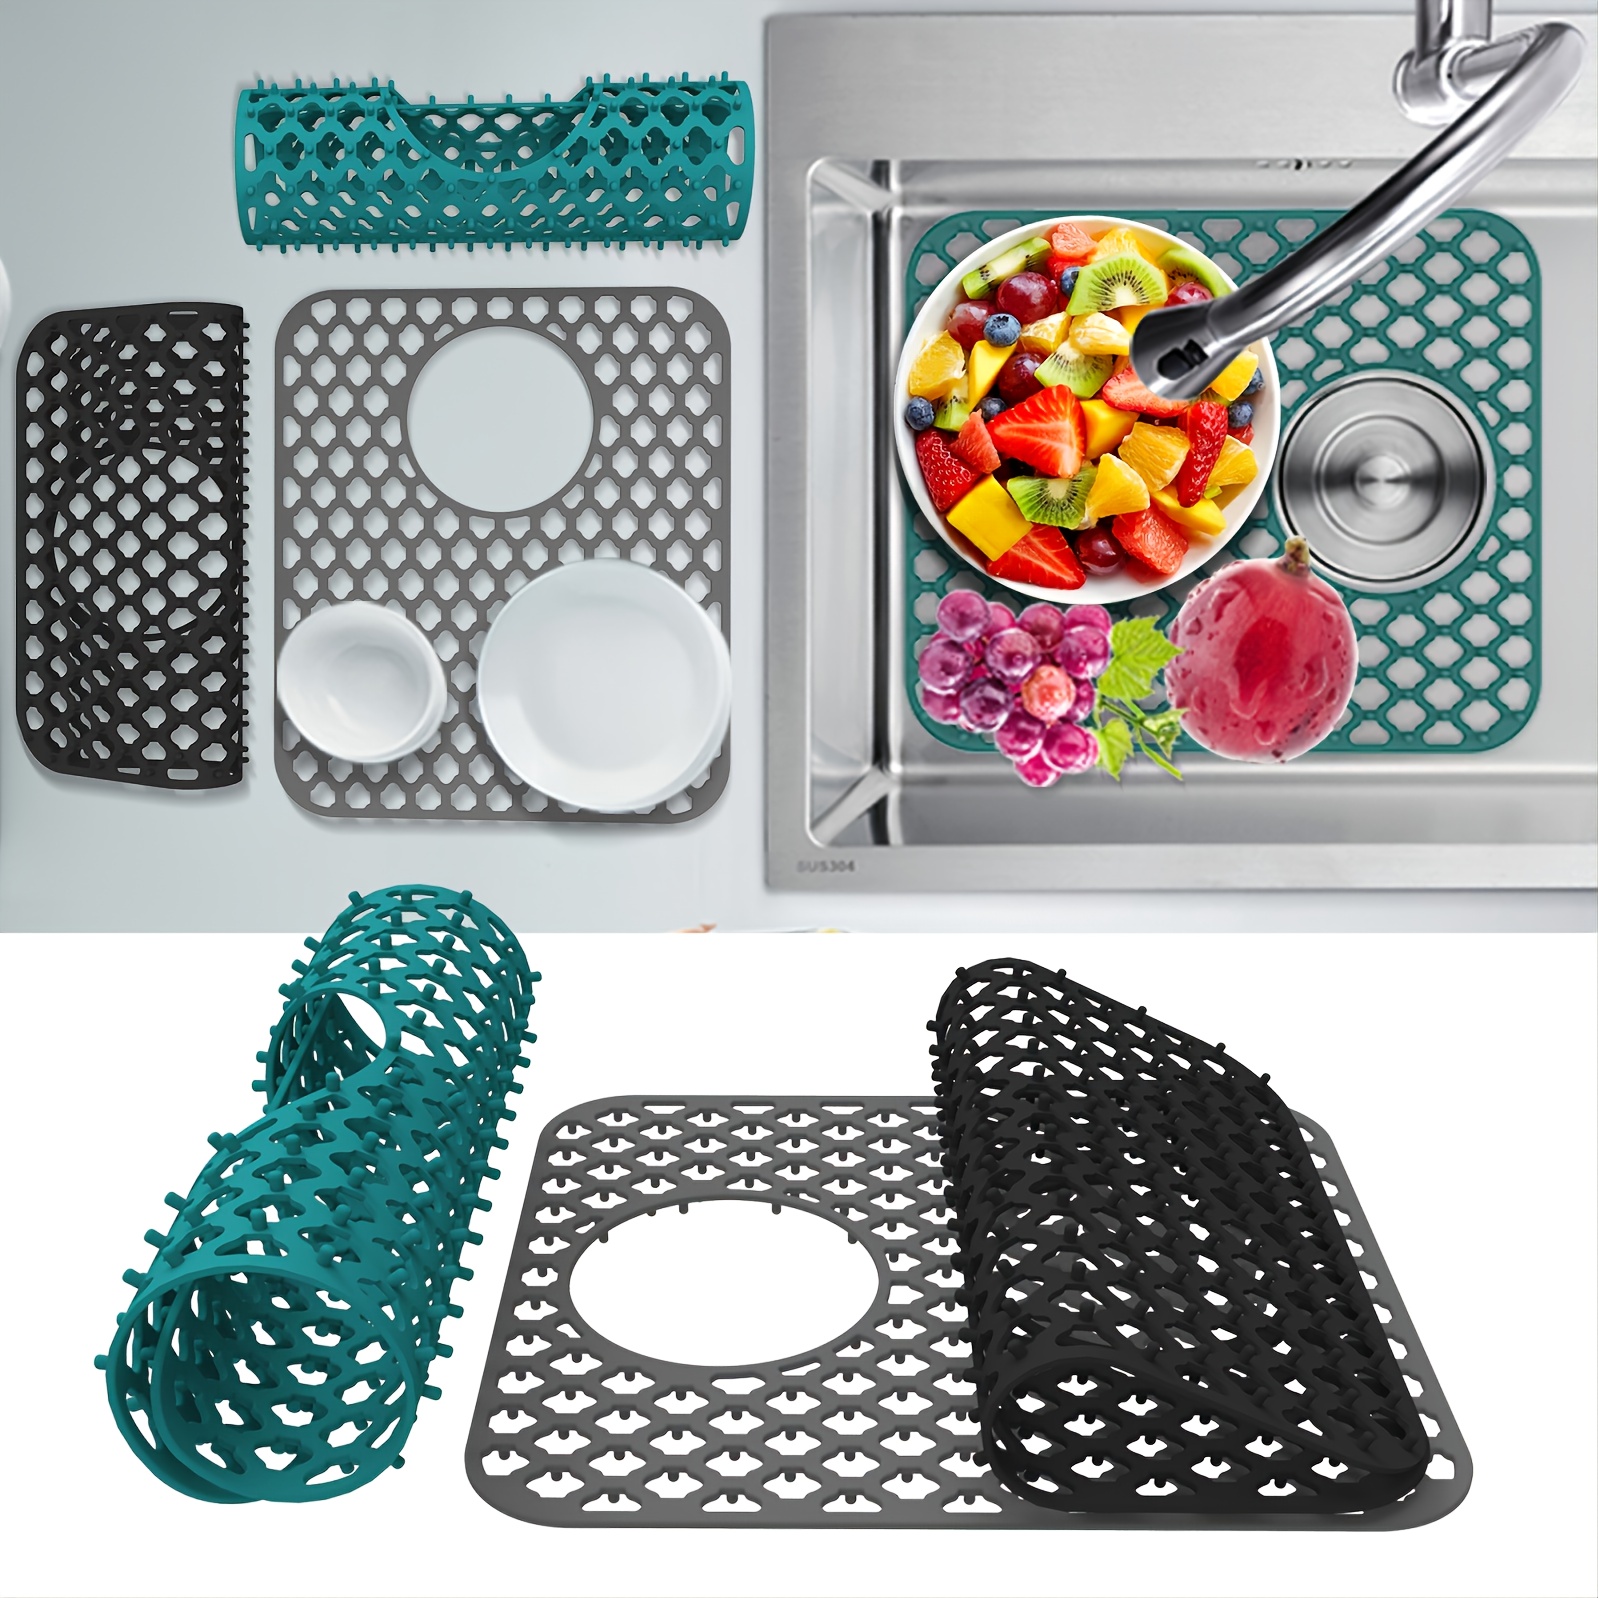 2pcs Kitchen Sink Mats, TSV Rubber Sink Mat, Kitchen Sink Grid Protector, Non-Slip Drain Pad Protector with Cuttable Center Drain, Collapsible Sink